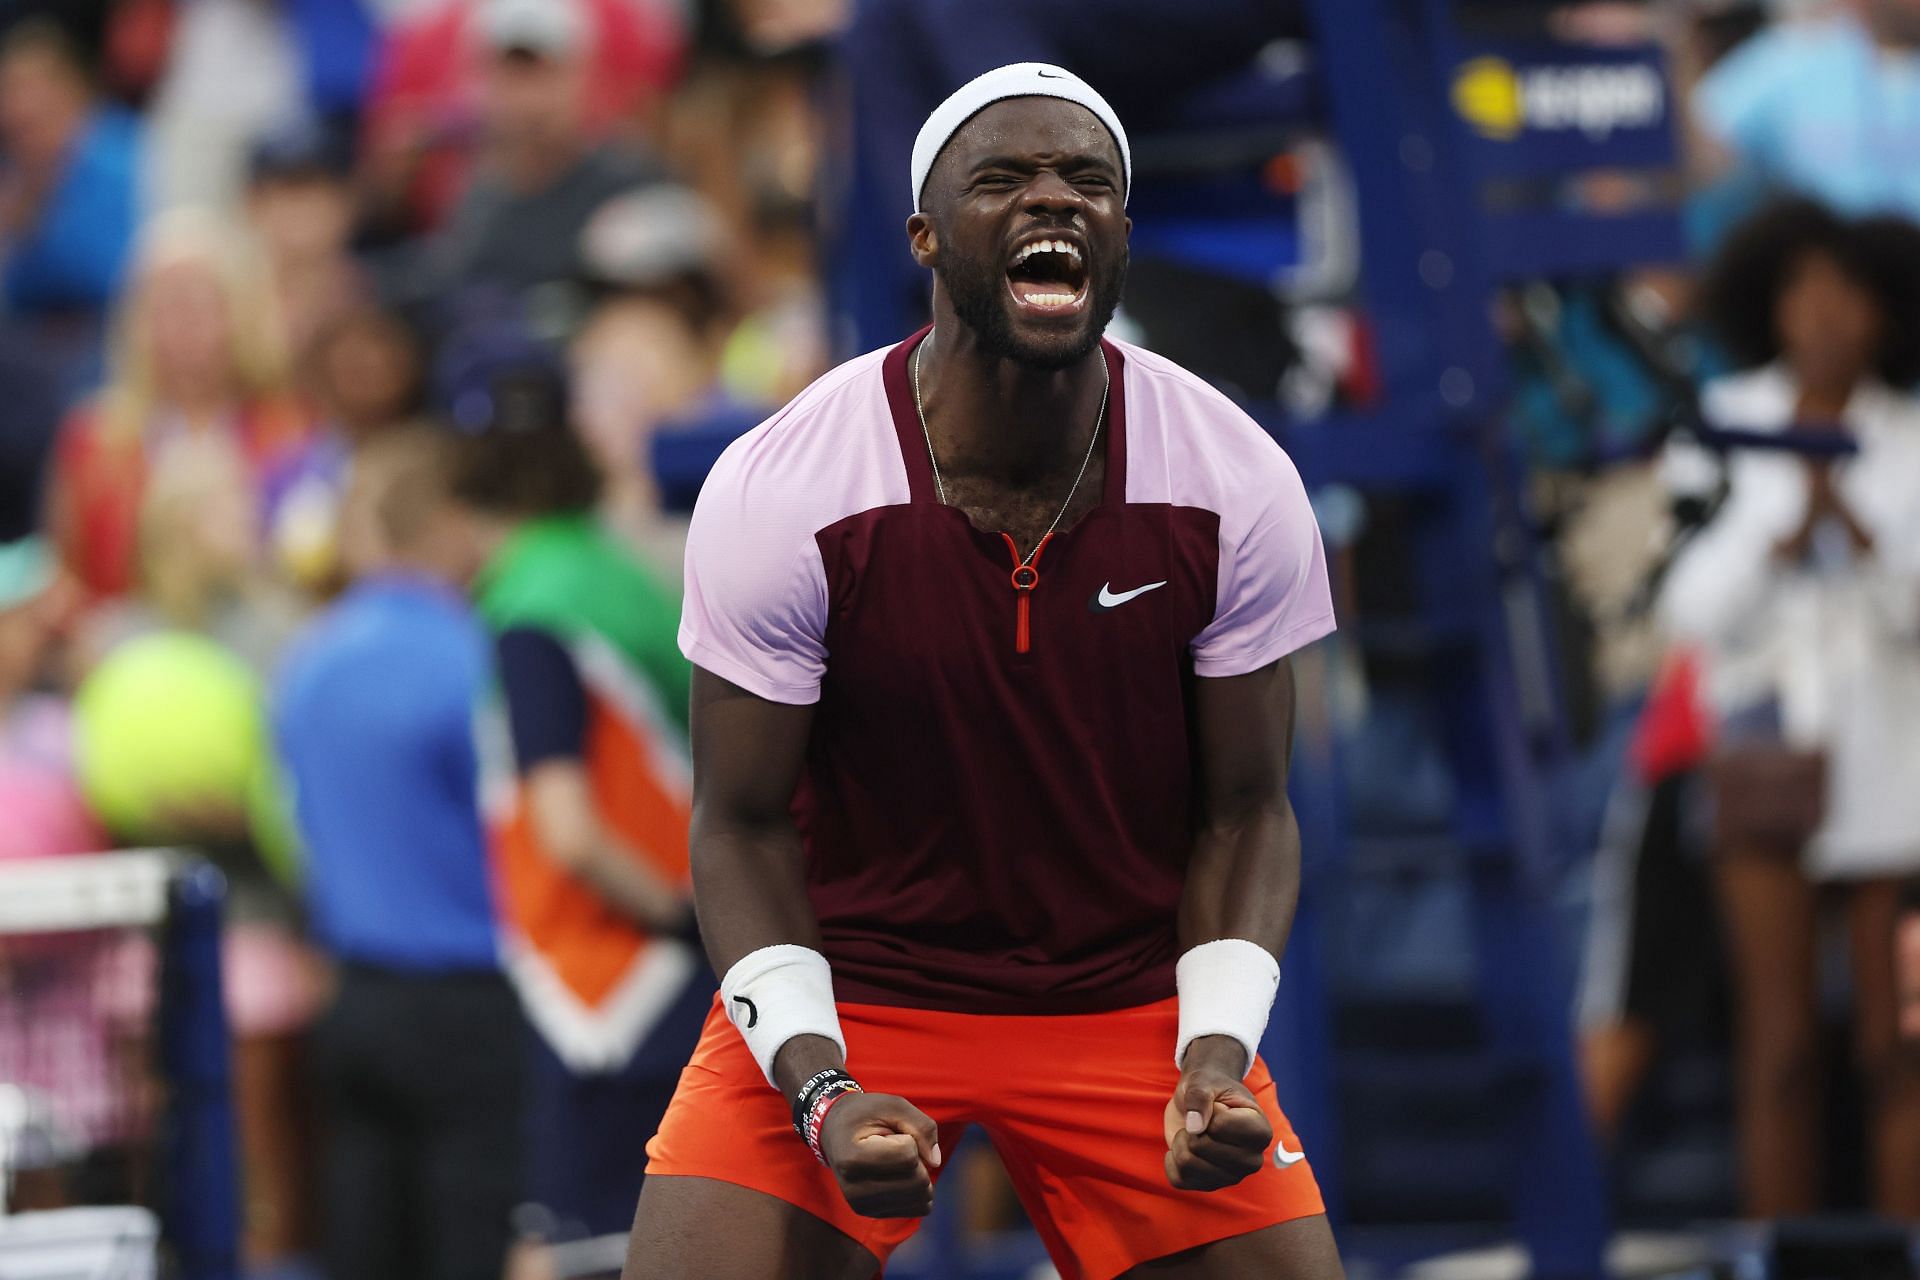 Frances Tiafoe is confident of his chances when he faces Nadal in the 2022 US Open 4R.